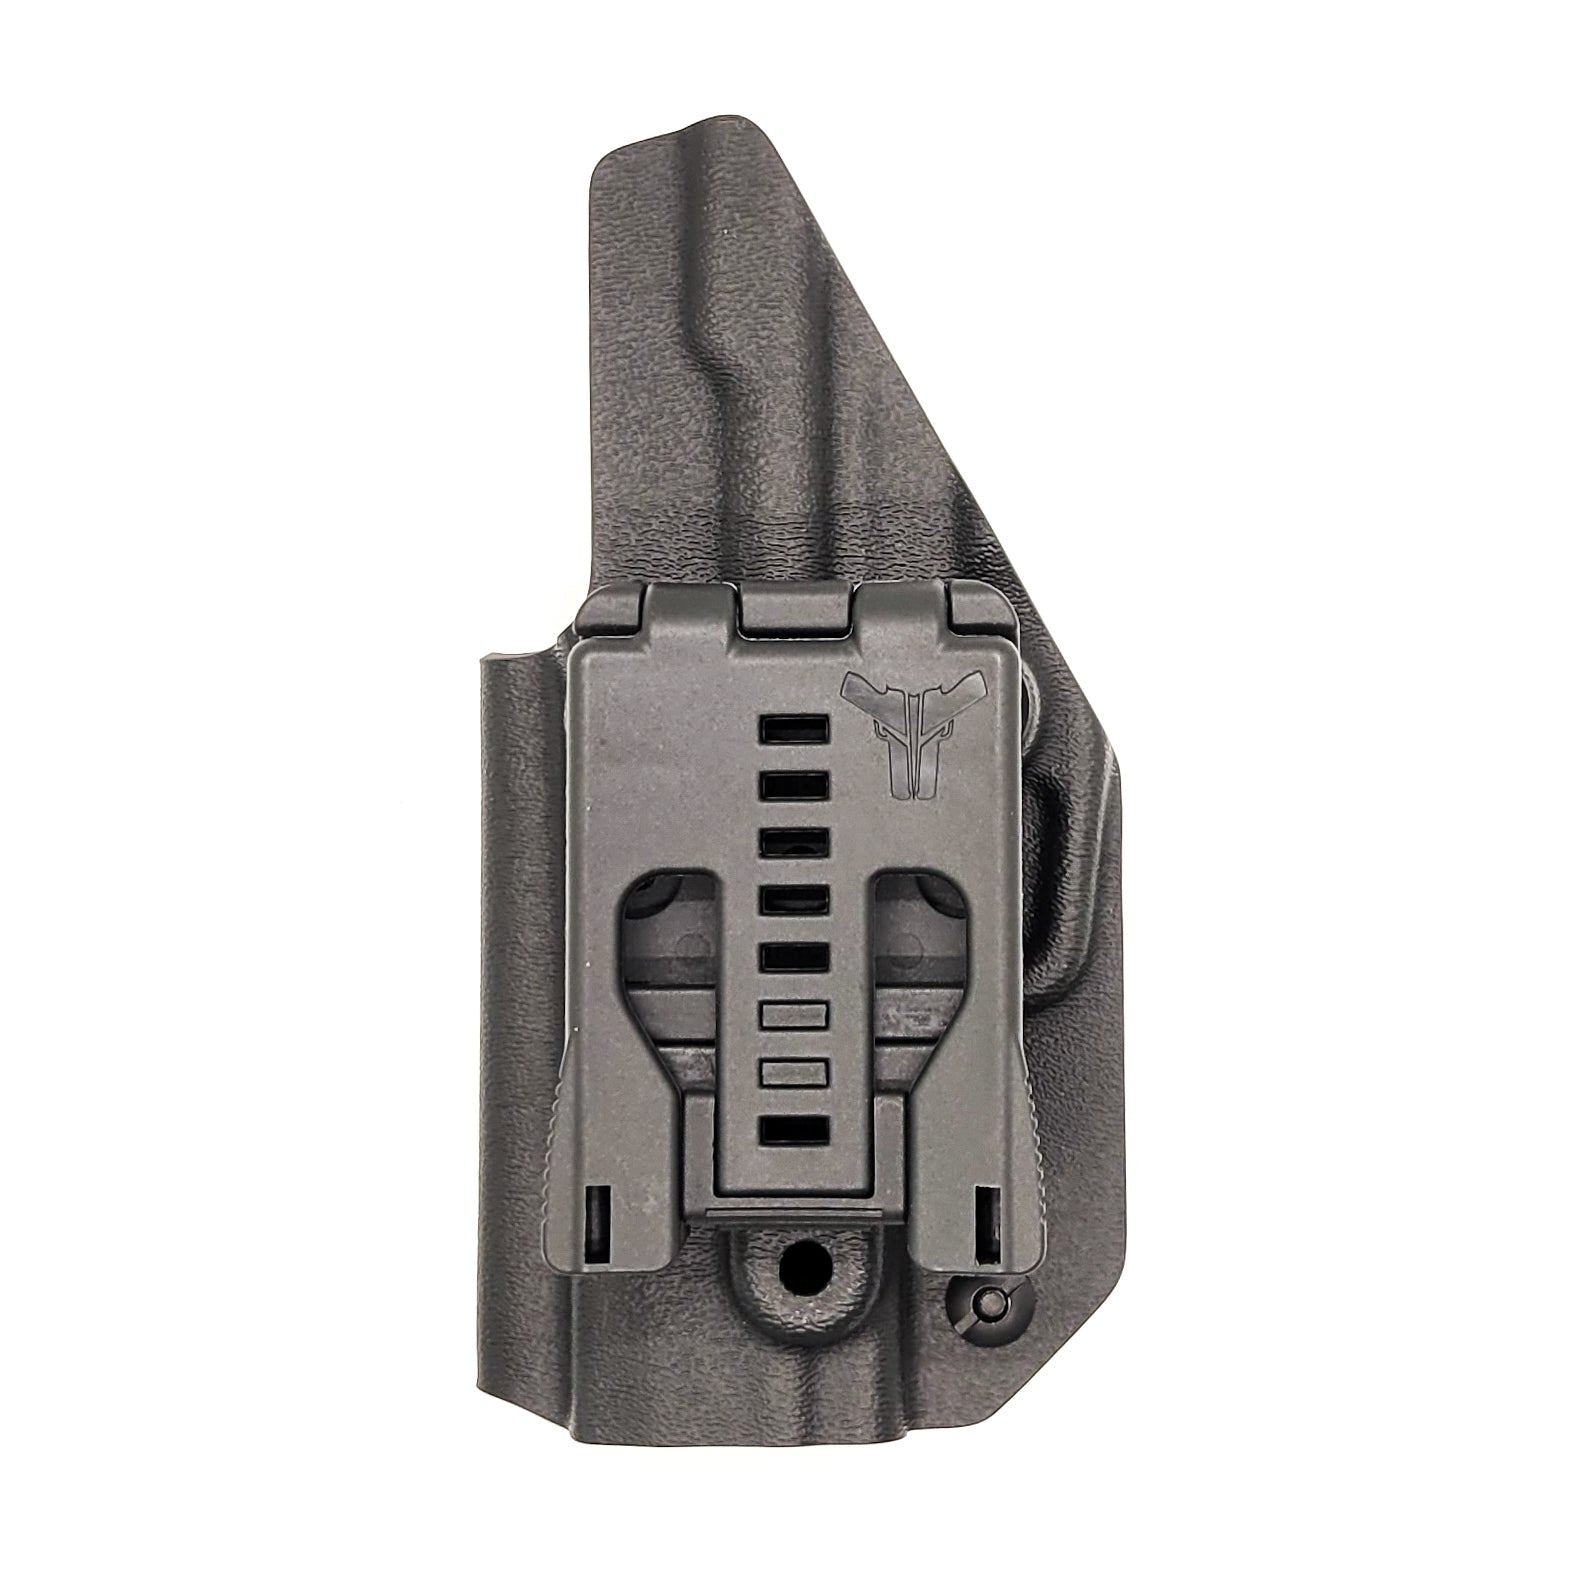 For the best, Outside Waistband OWB Kydex Holster designed to fit the Sig Sauer P365-XMACRO COMP ROMEOZERO ELITE, P365-XMACRO COMP, P365-XMACRO TACOPS, and P365-XMACRO handgun, shop Four Brothers Holsters. Made in USA. Full sweat guard, adjustable retention. Open muzzle for threaded barrels, cleared for red dot sights